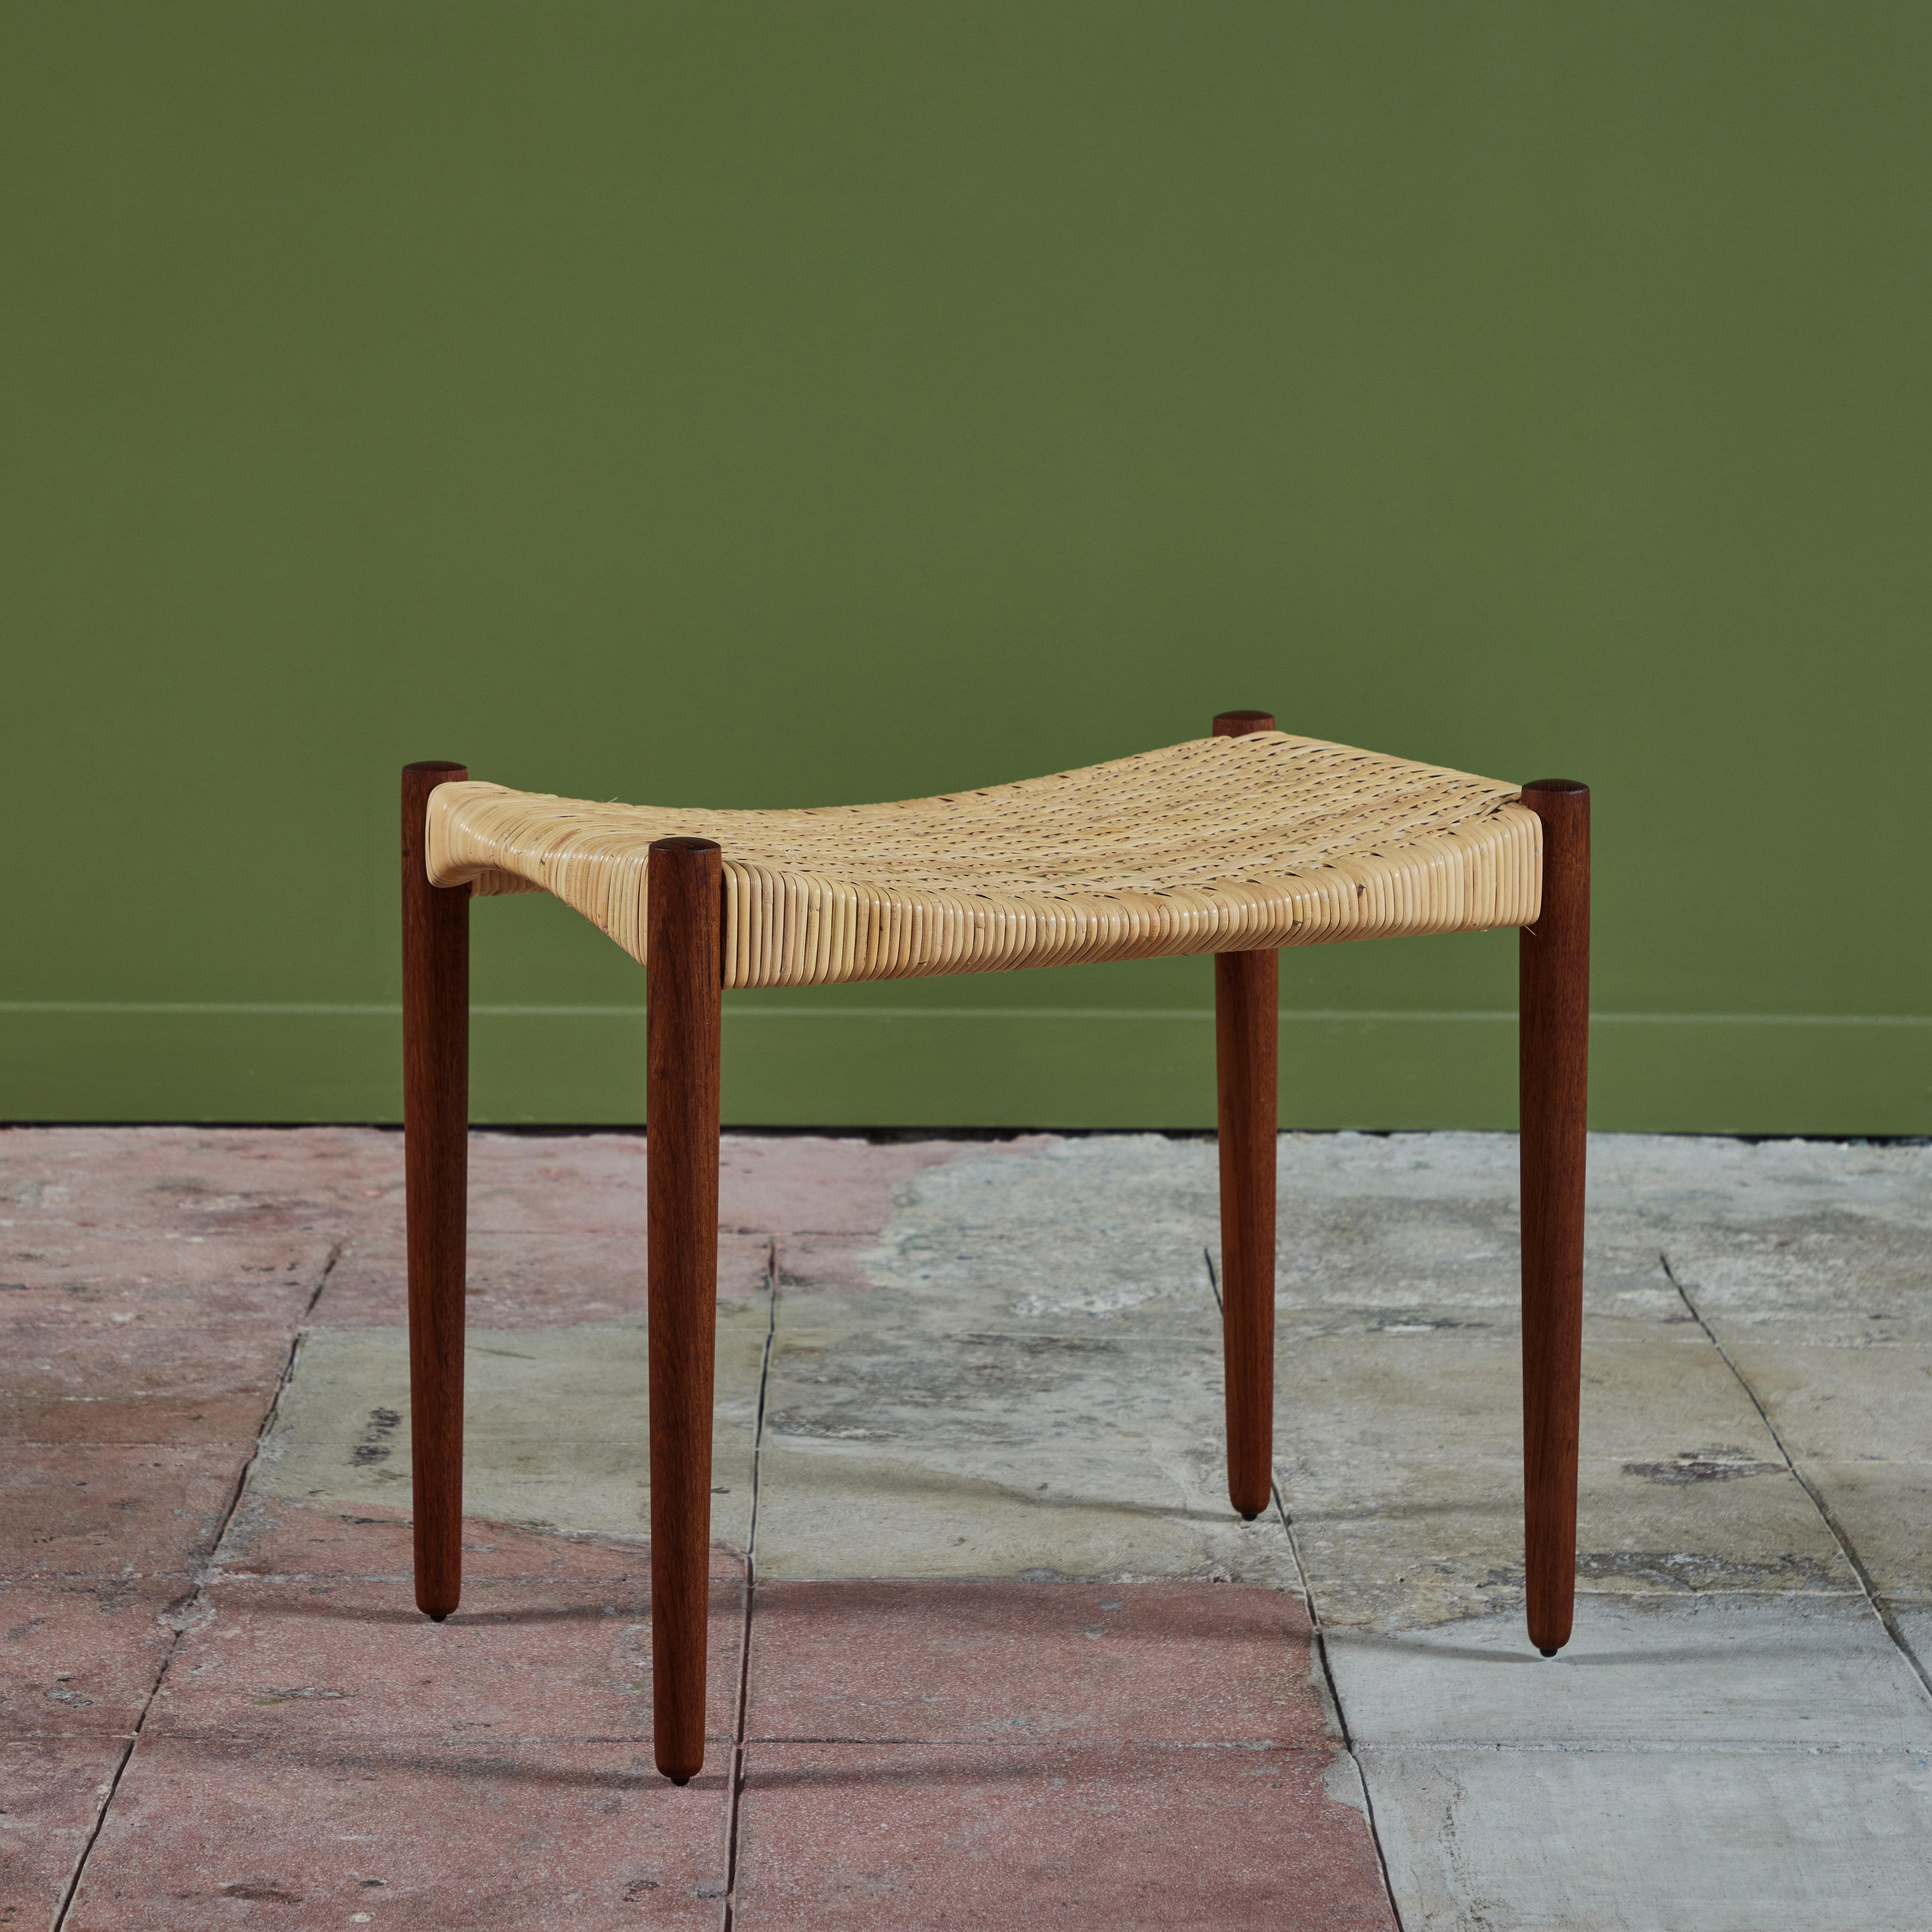 Cane stool by Ejner Larsen & Aksel Bender Madsen for Willy Beck, c.1950s, Denmark. The stool features a woven cane seat and tapered teak dowel legs.

Dimensions 
22